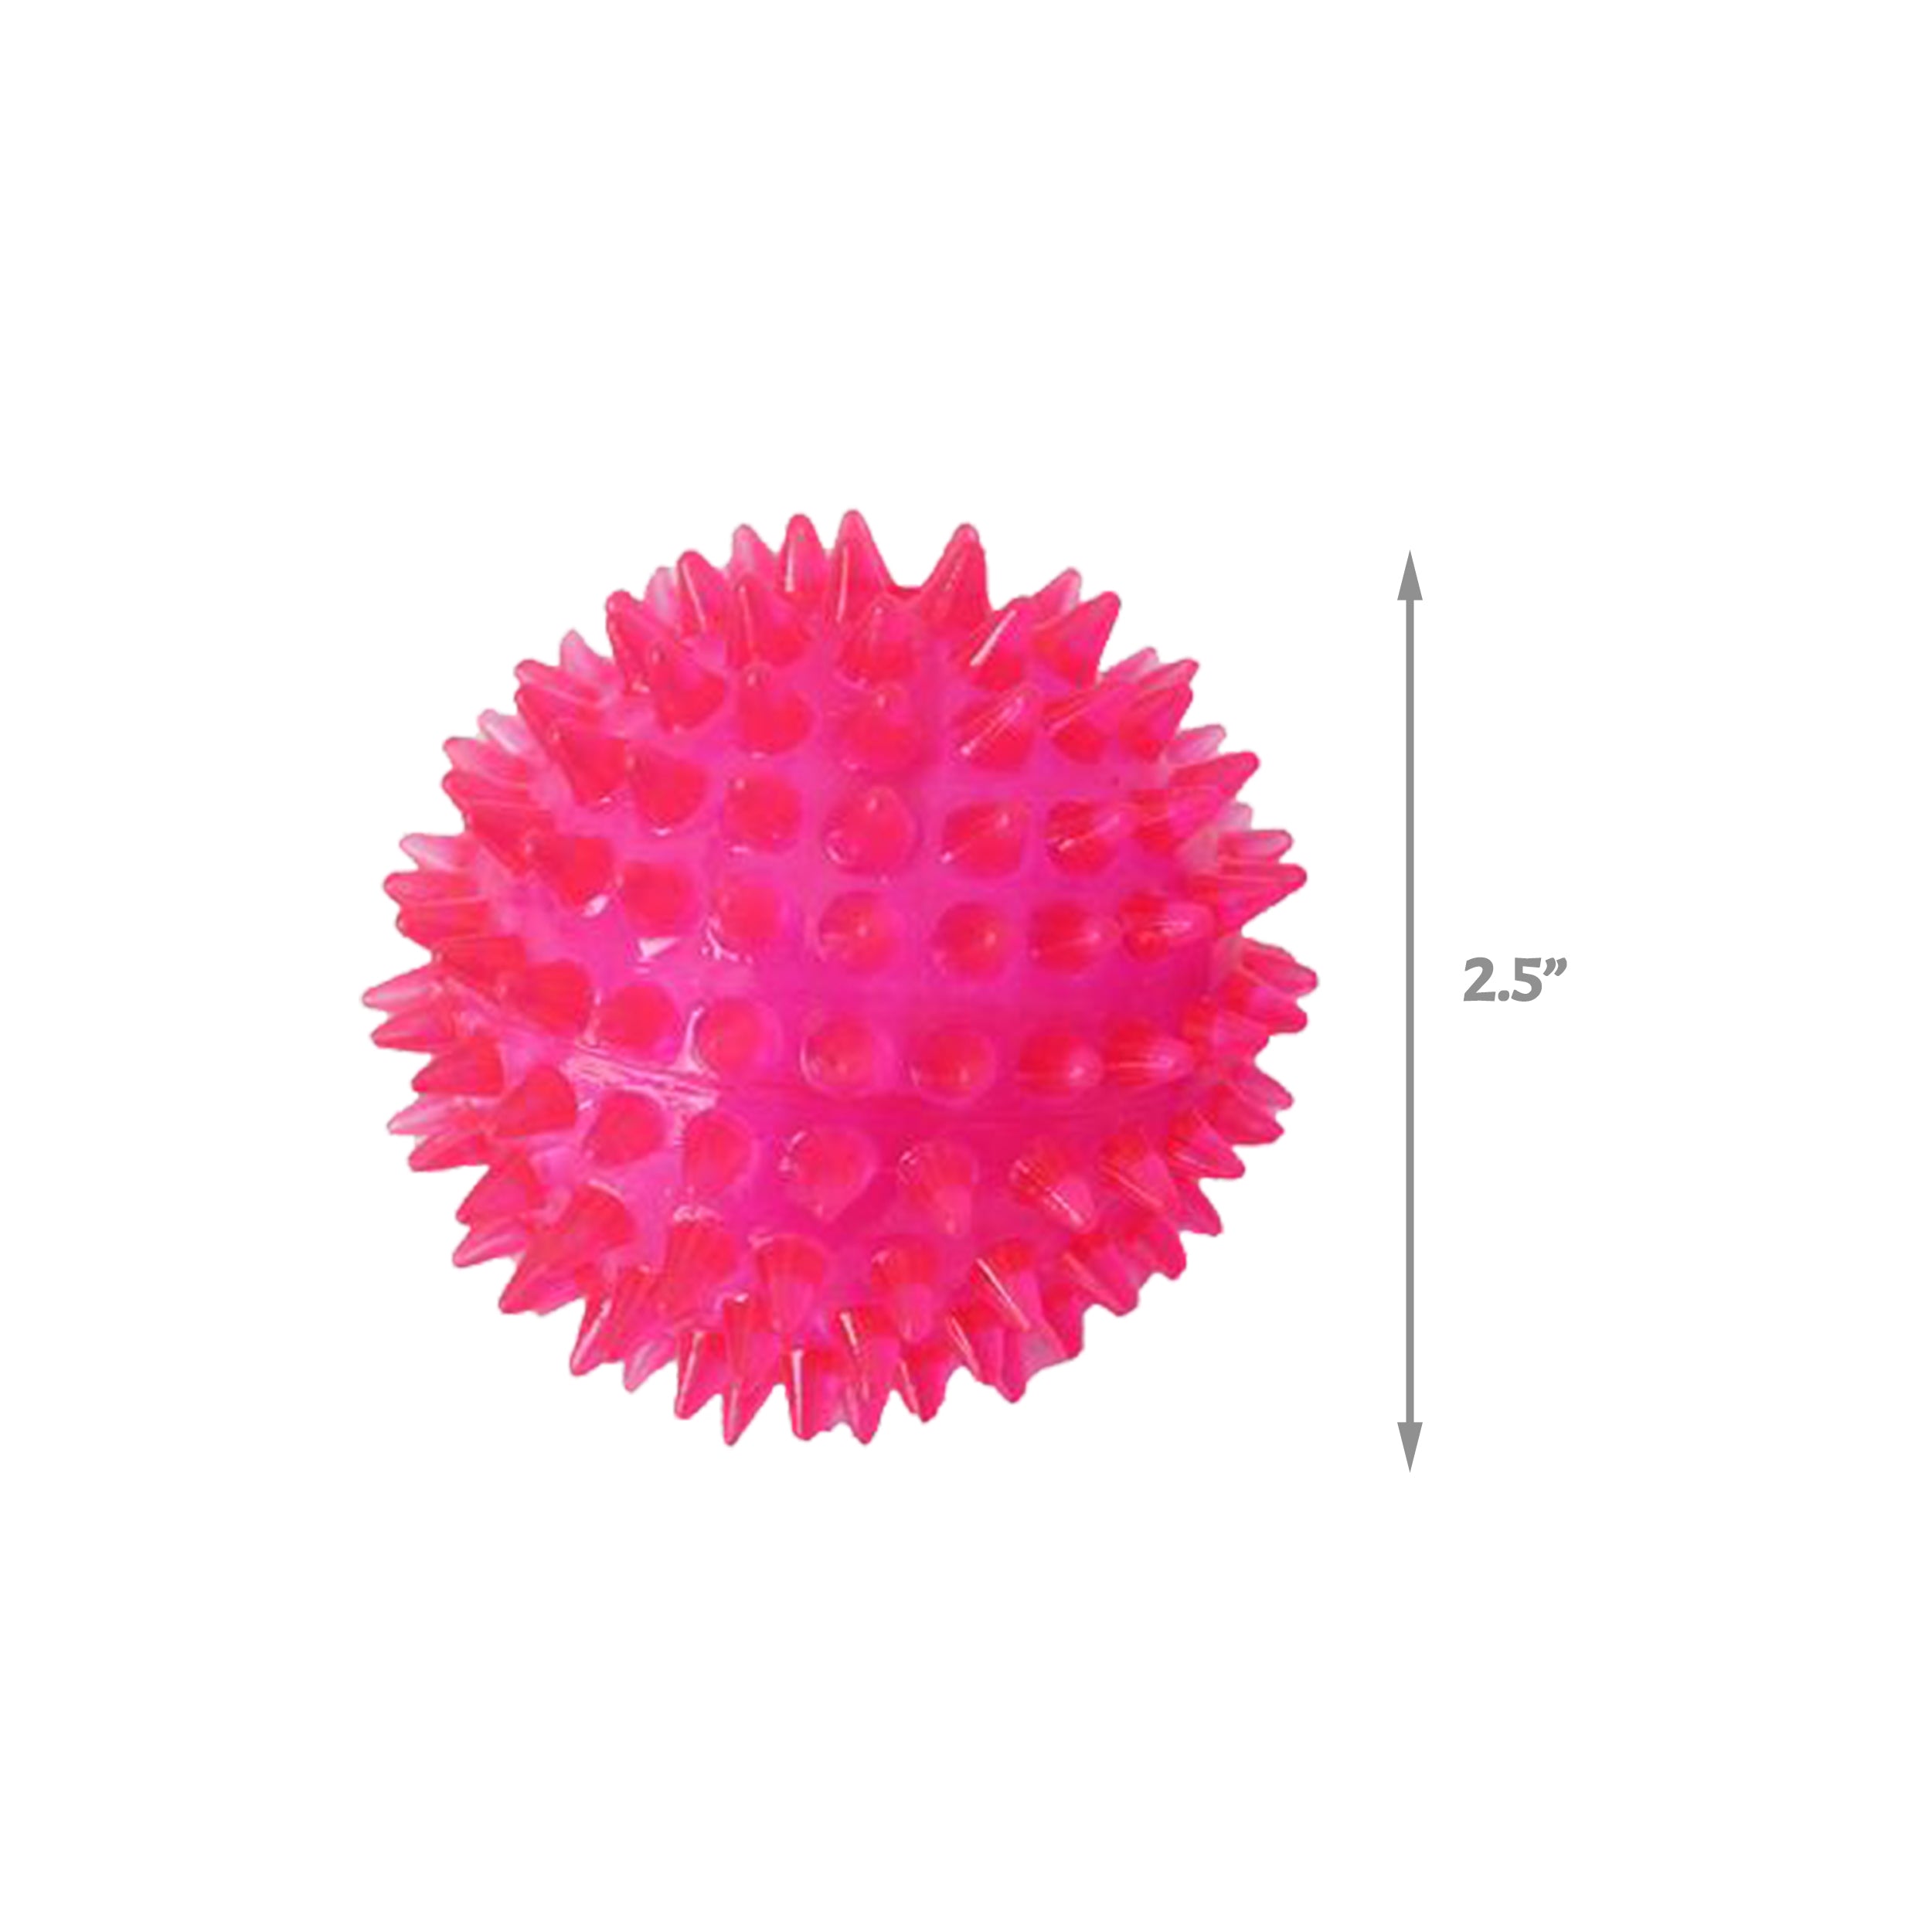 [Dog toy] Squeaky Spiky Ball